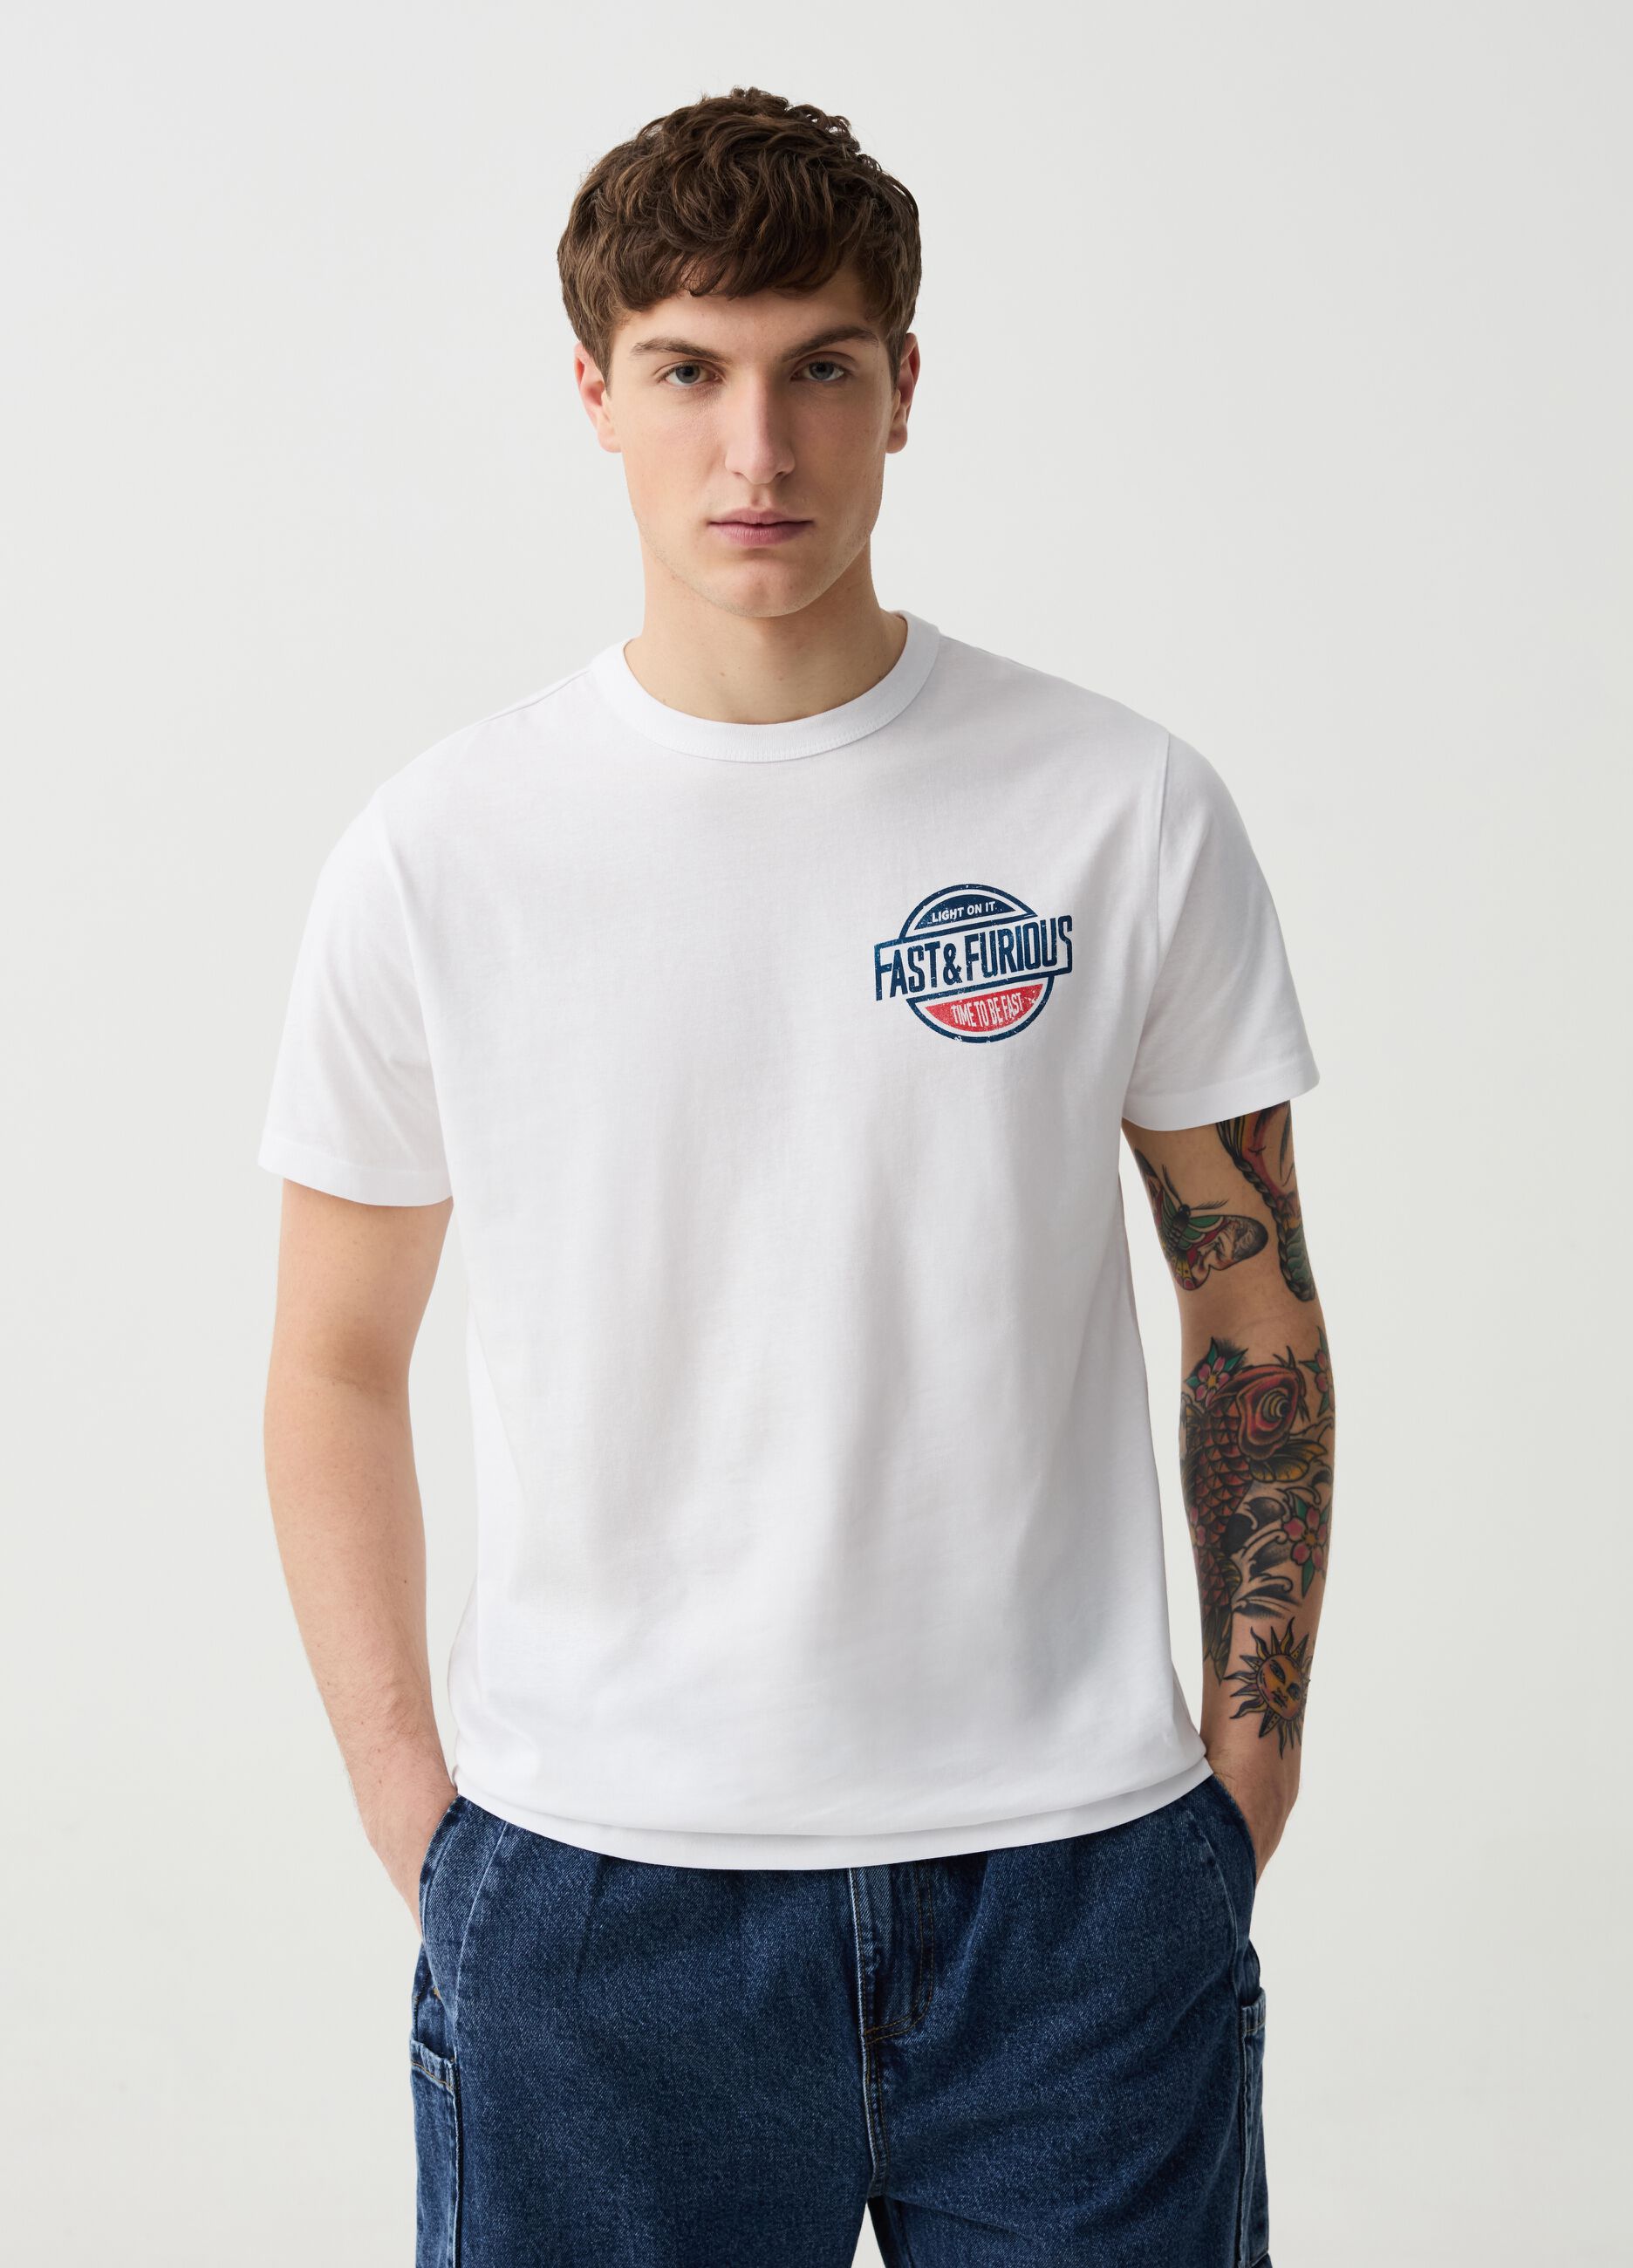 T-shirt with Fast and Furious print